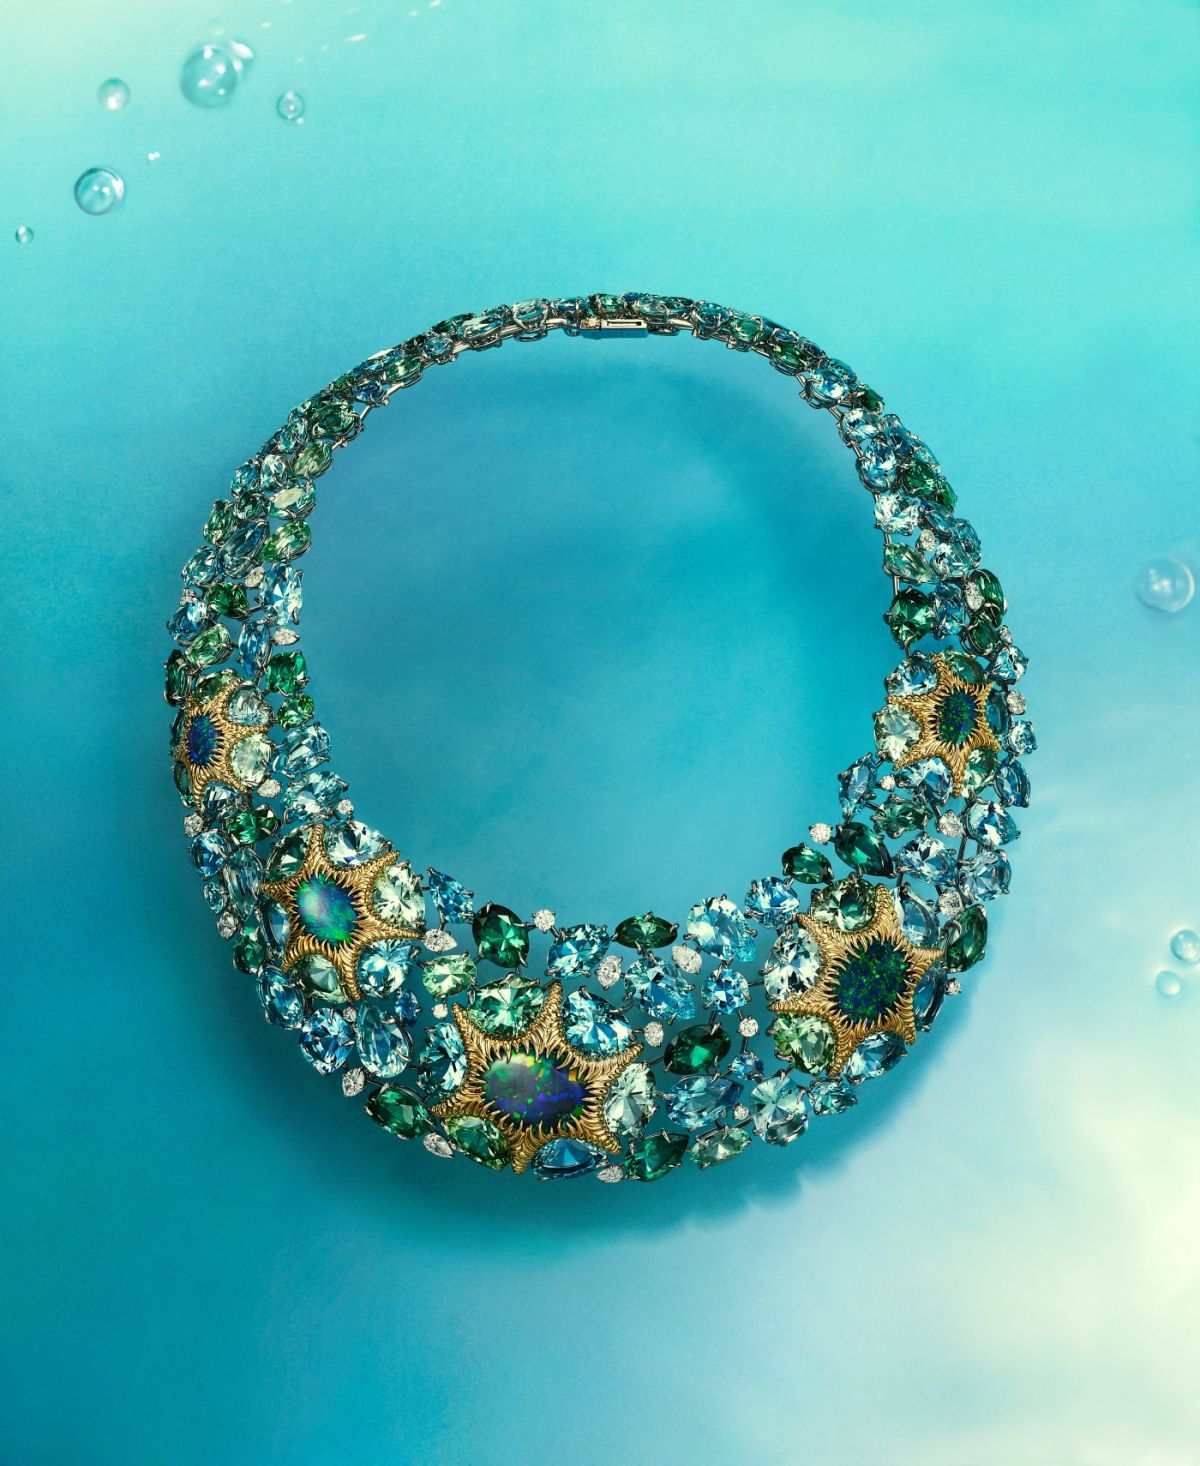 Magnificent Jewels: The Best New High Jewelry Pieces Of 2023